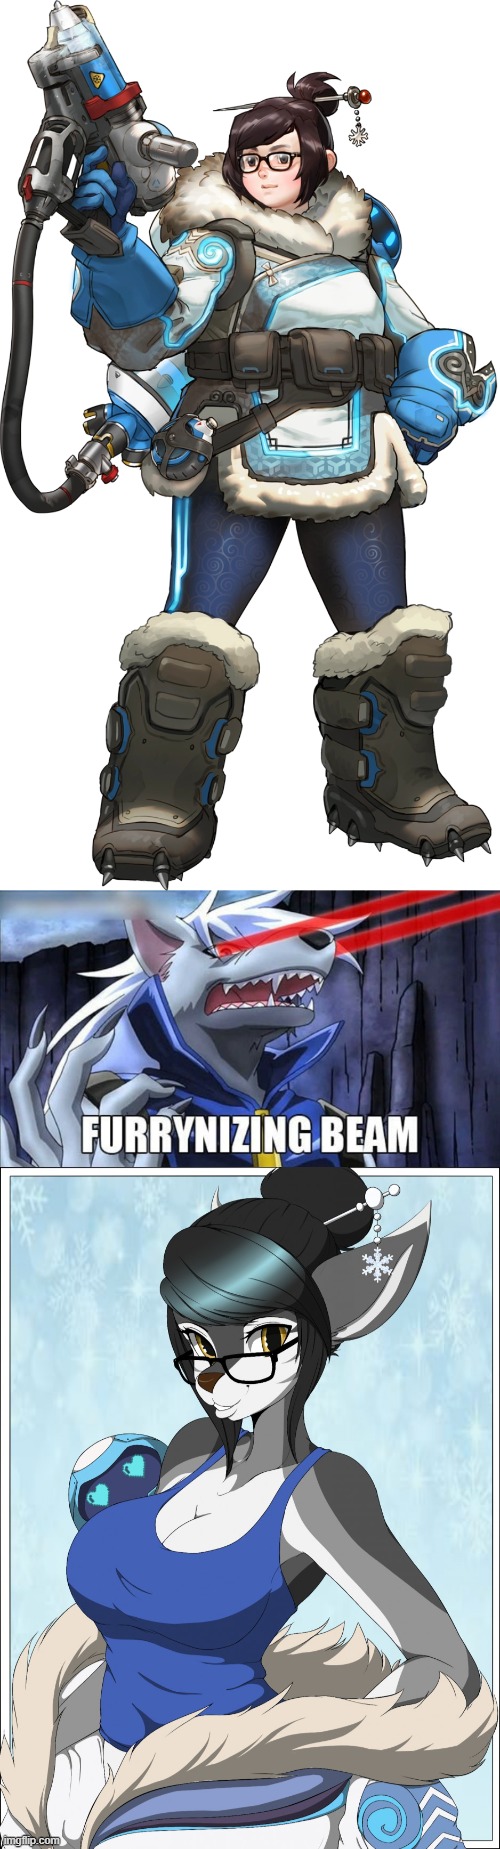 By SachaVayle | image tagged in furrynizing beam,furry,overwatch,mei | made w/ Imgflip meme maker